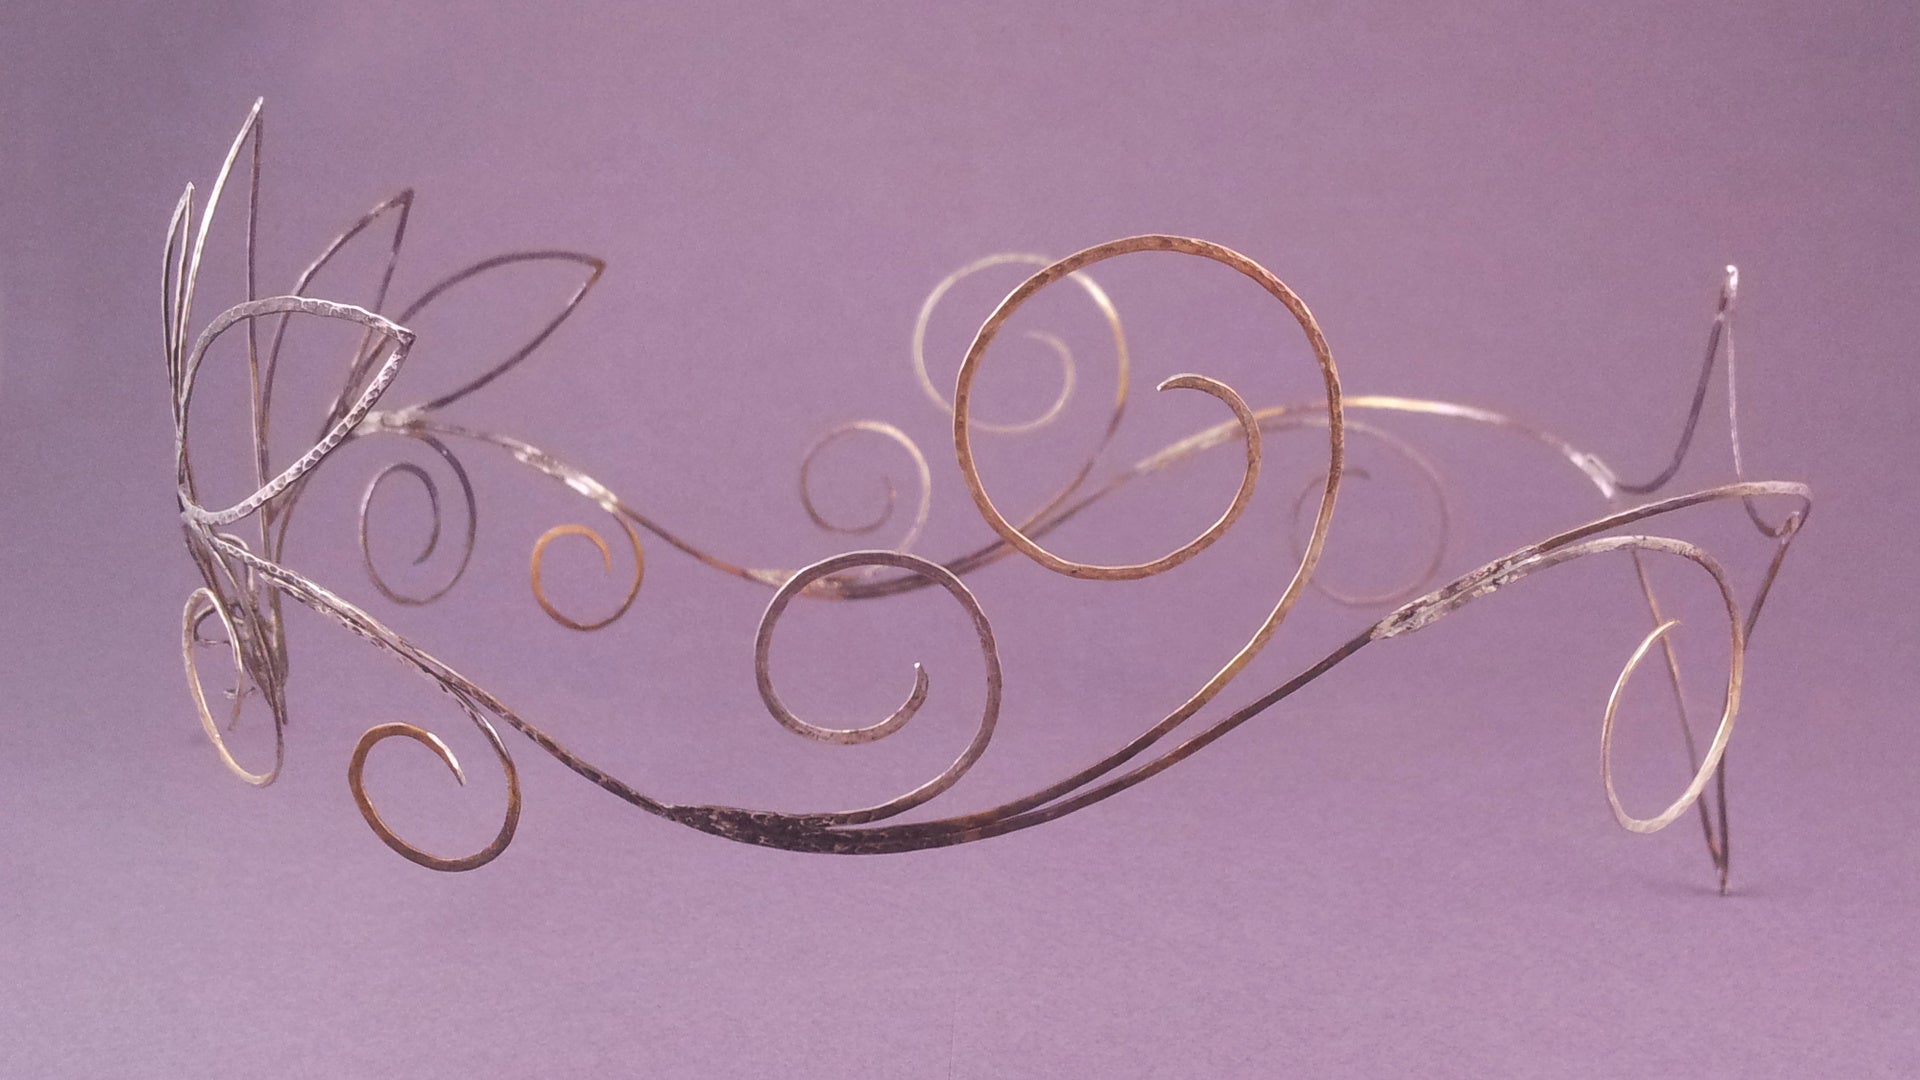 Side view of the ready soldered tiara